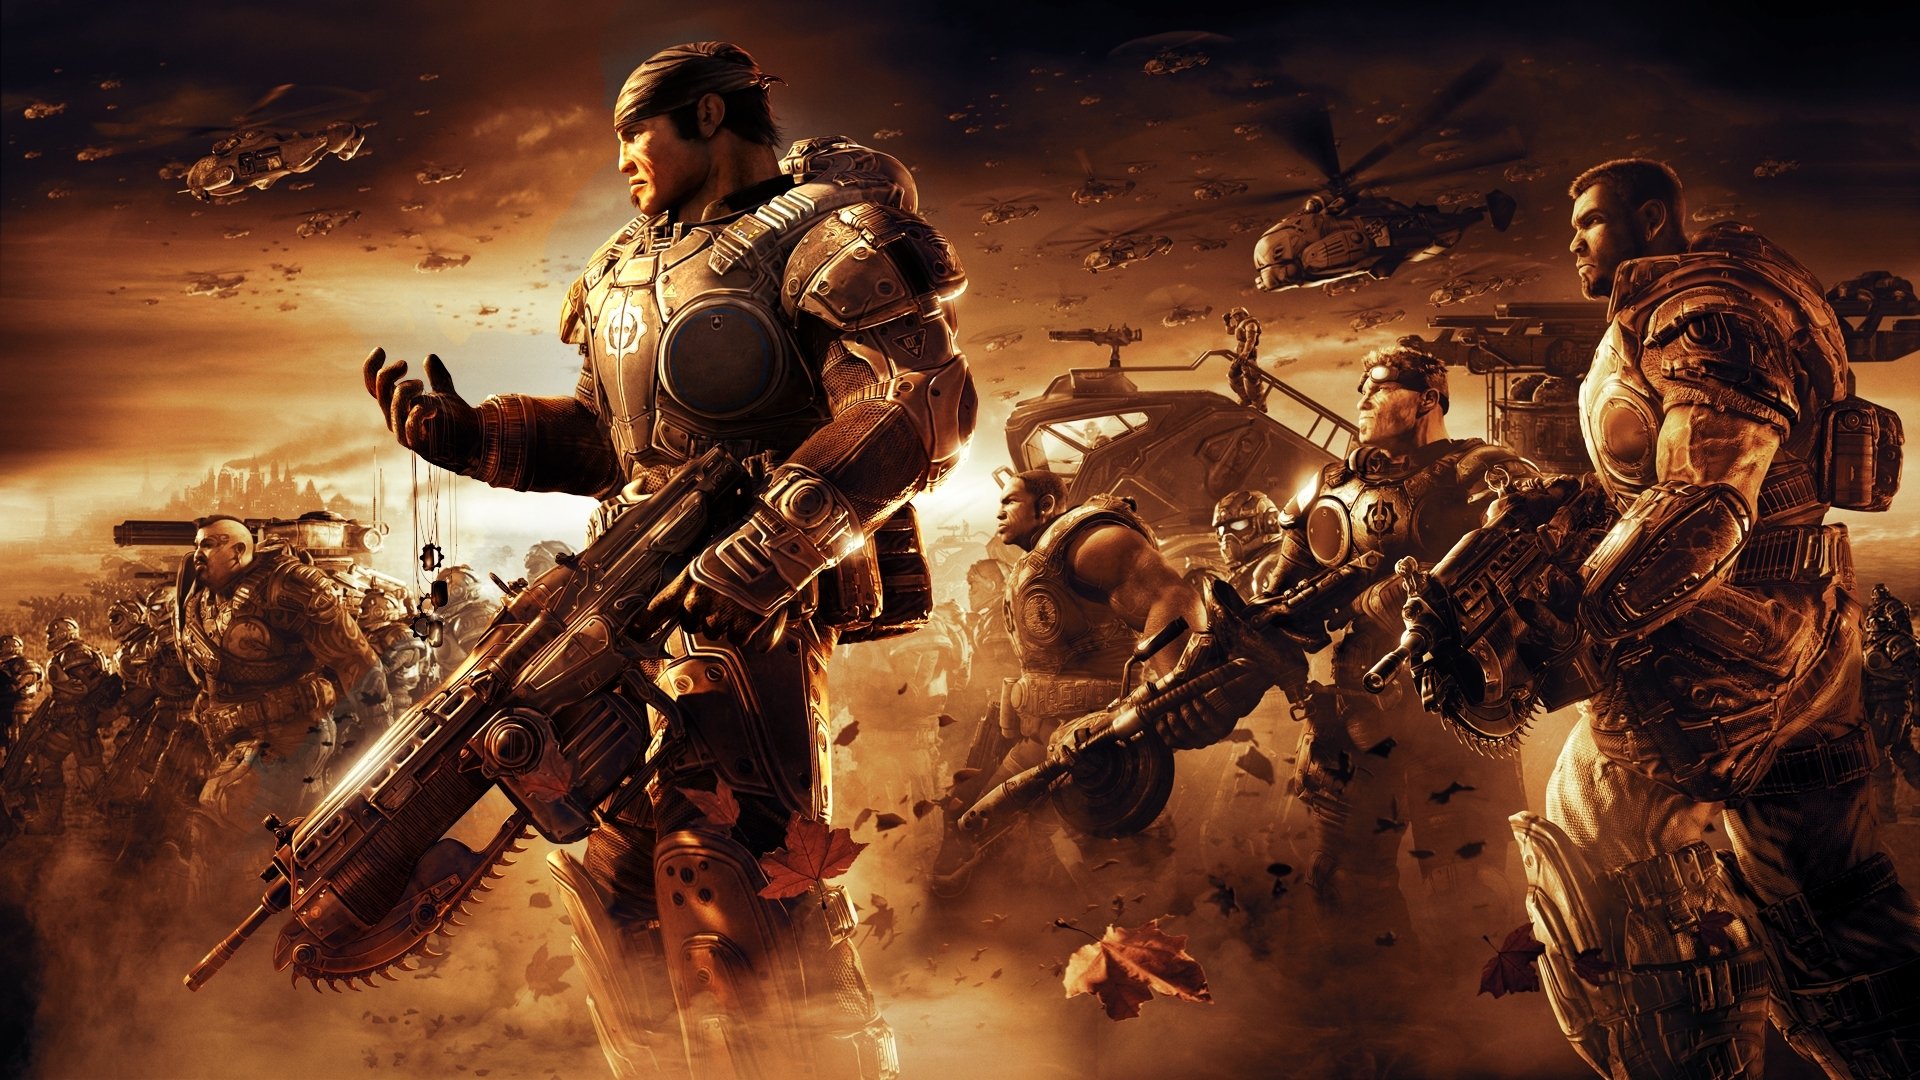 Gears of war 3 xbox store